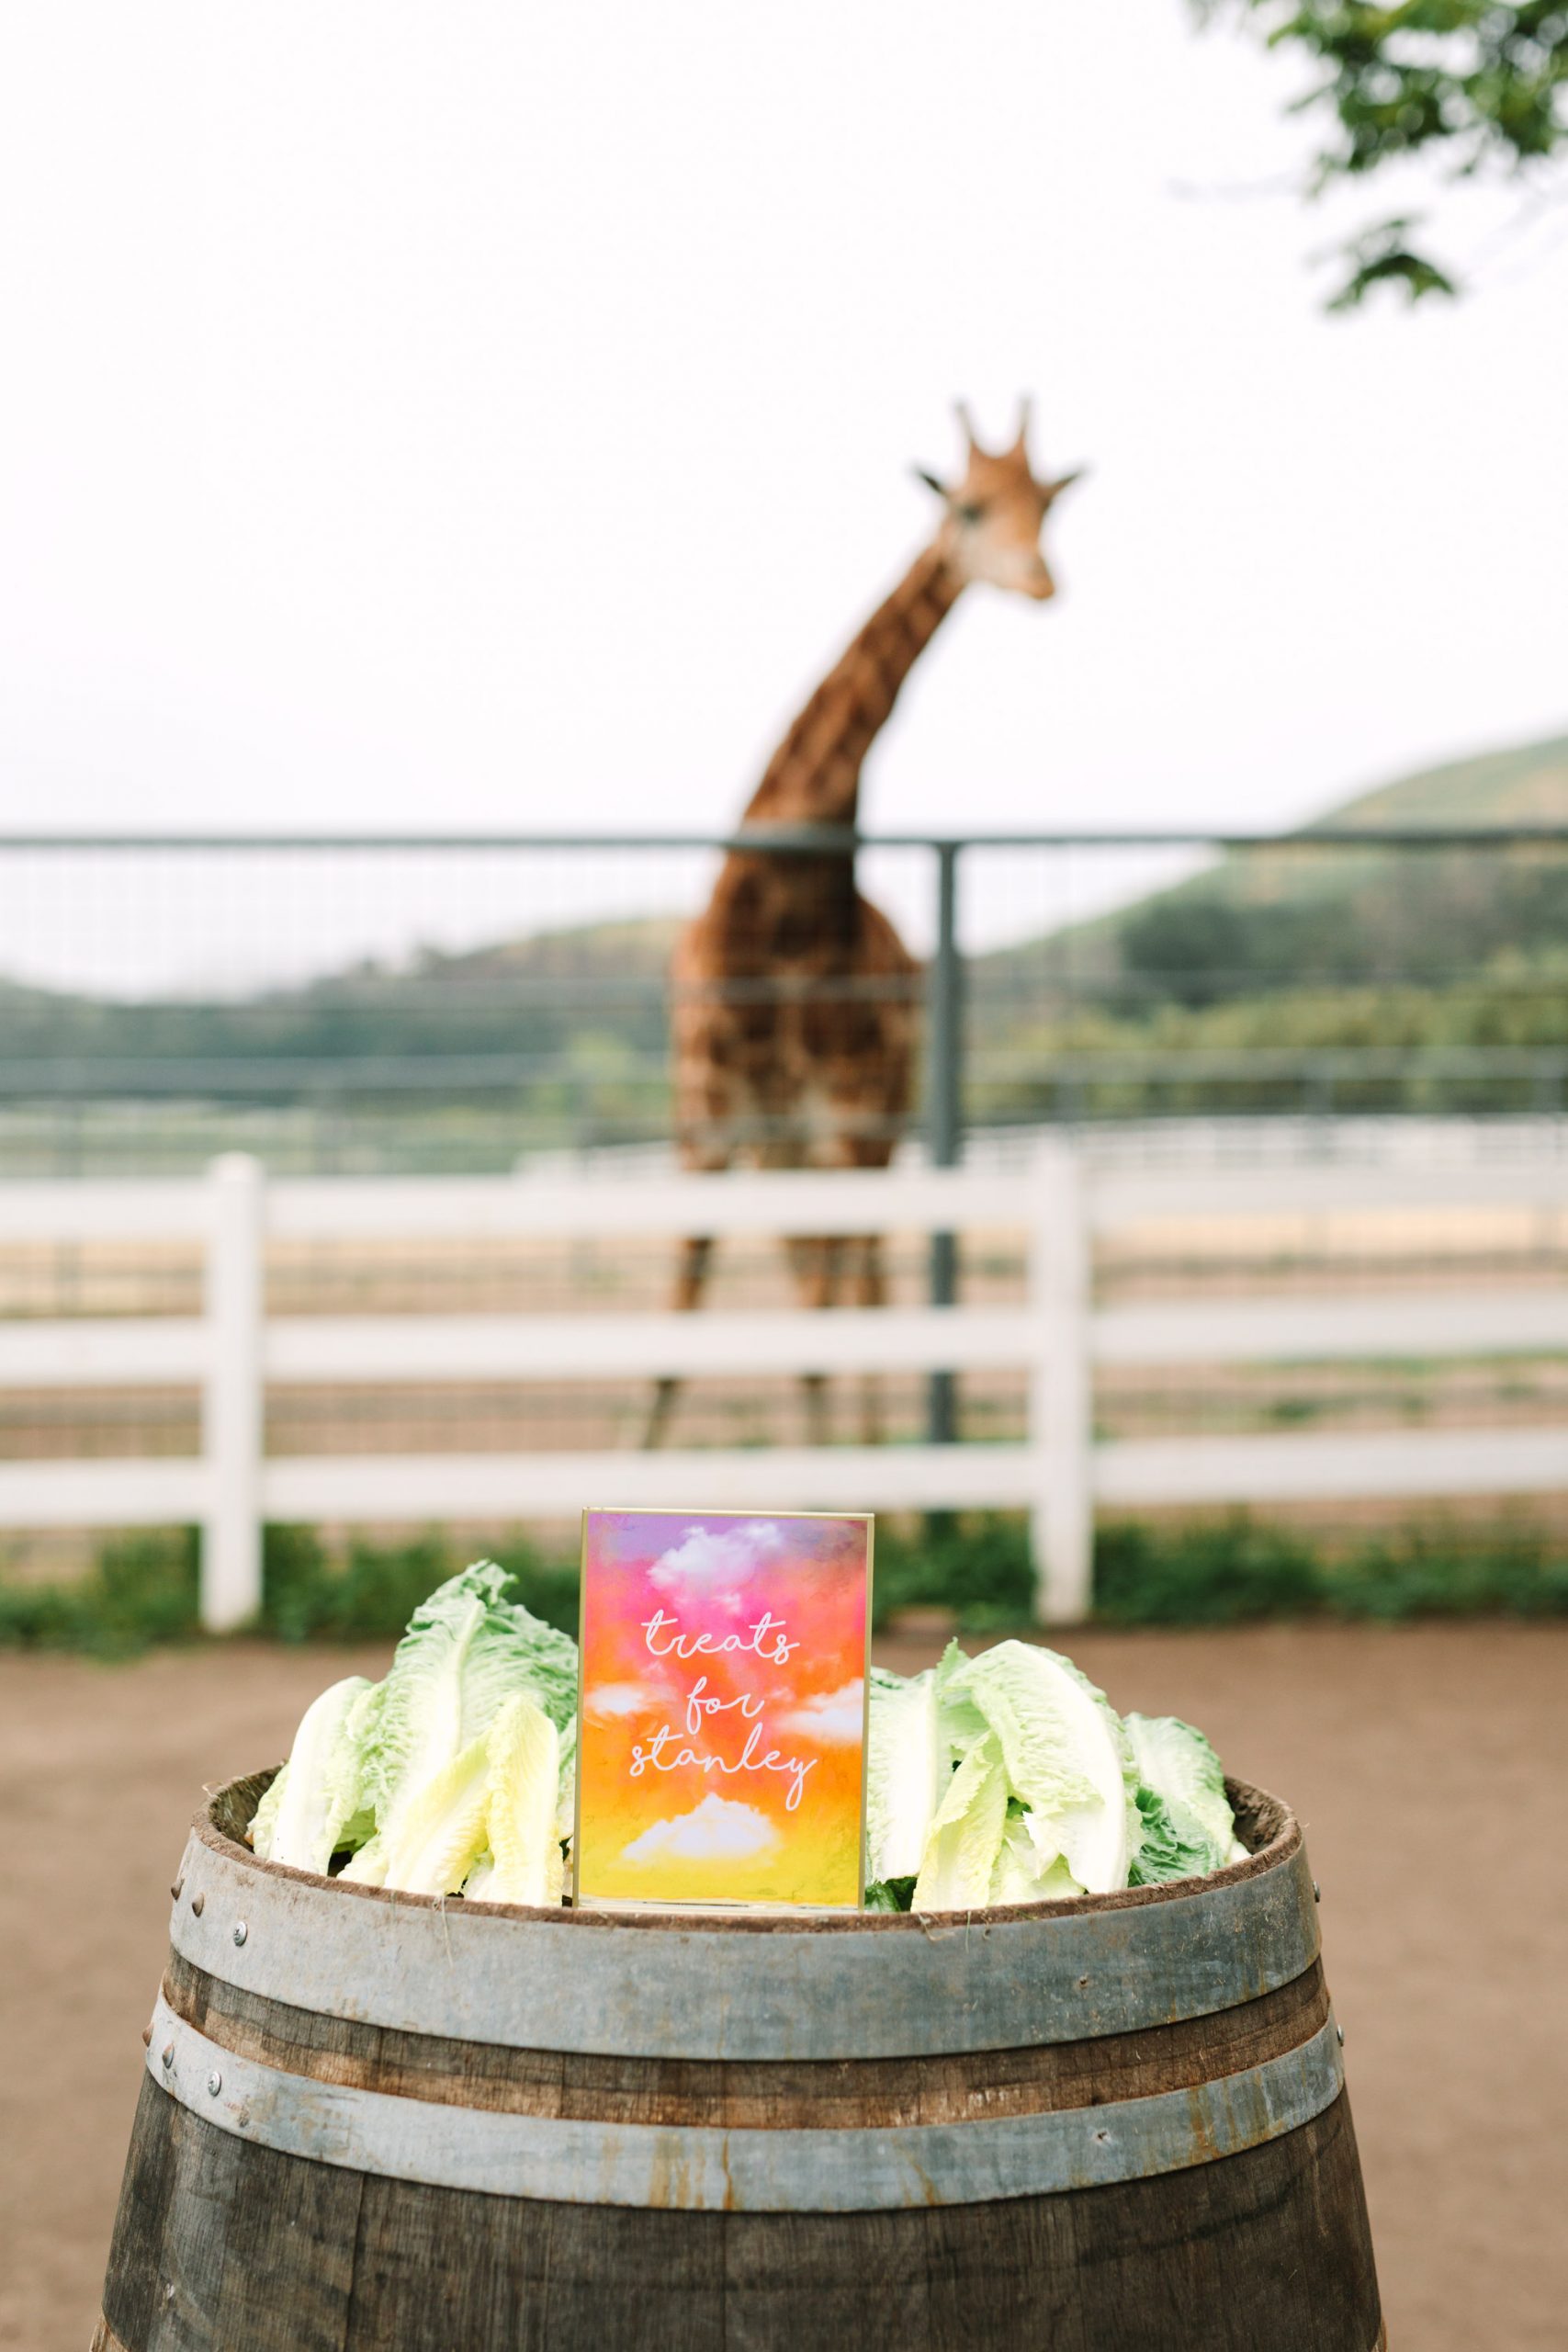 Stanley the giraffe's lettuce snacks by Mary Costa Photography